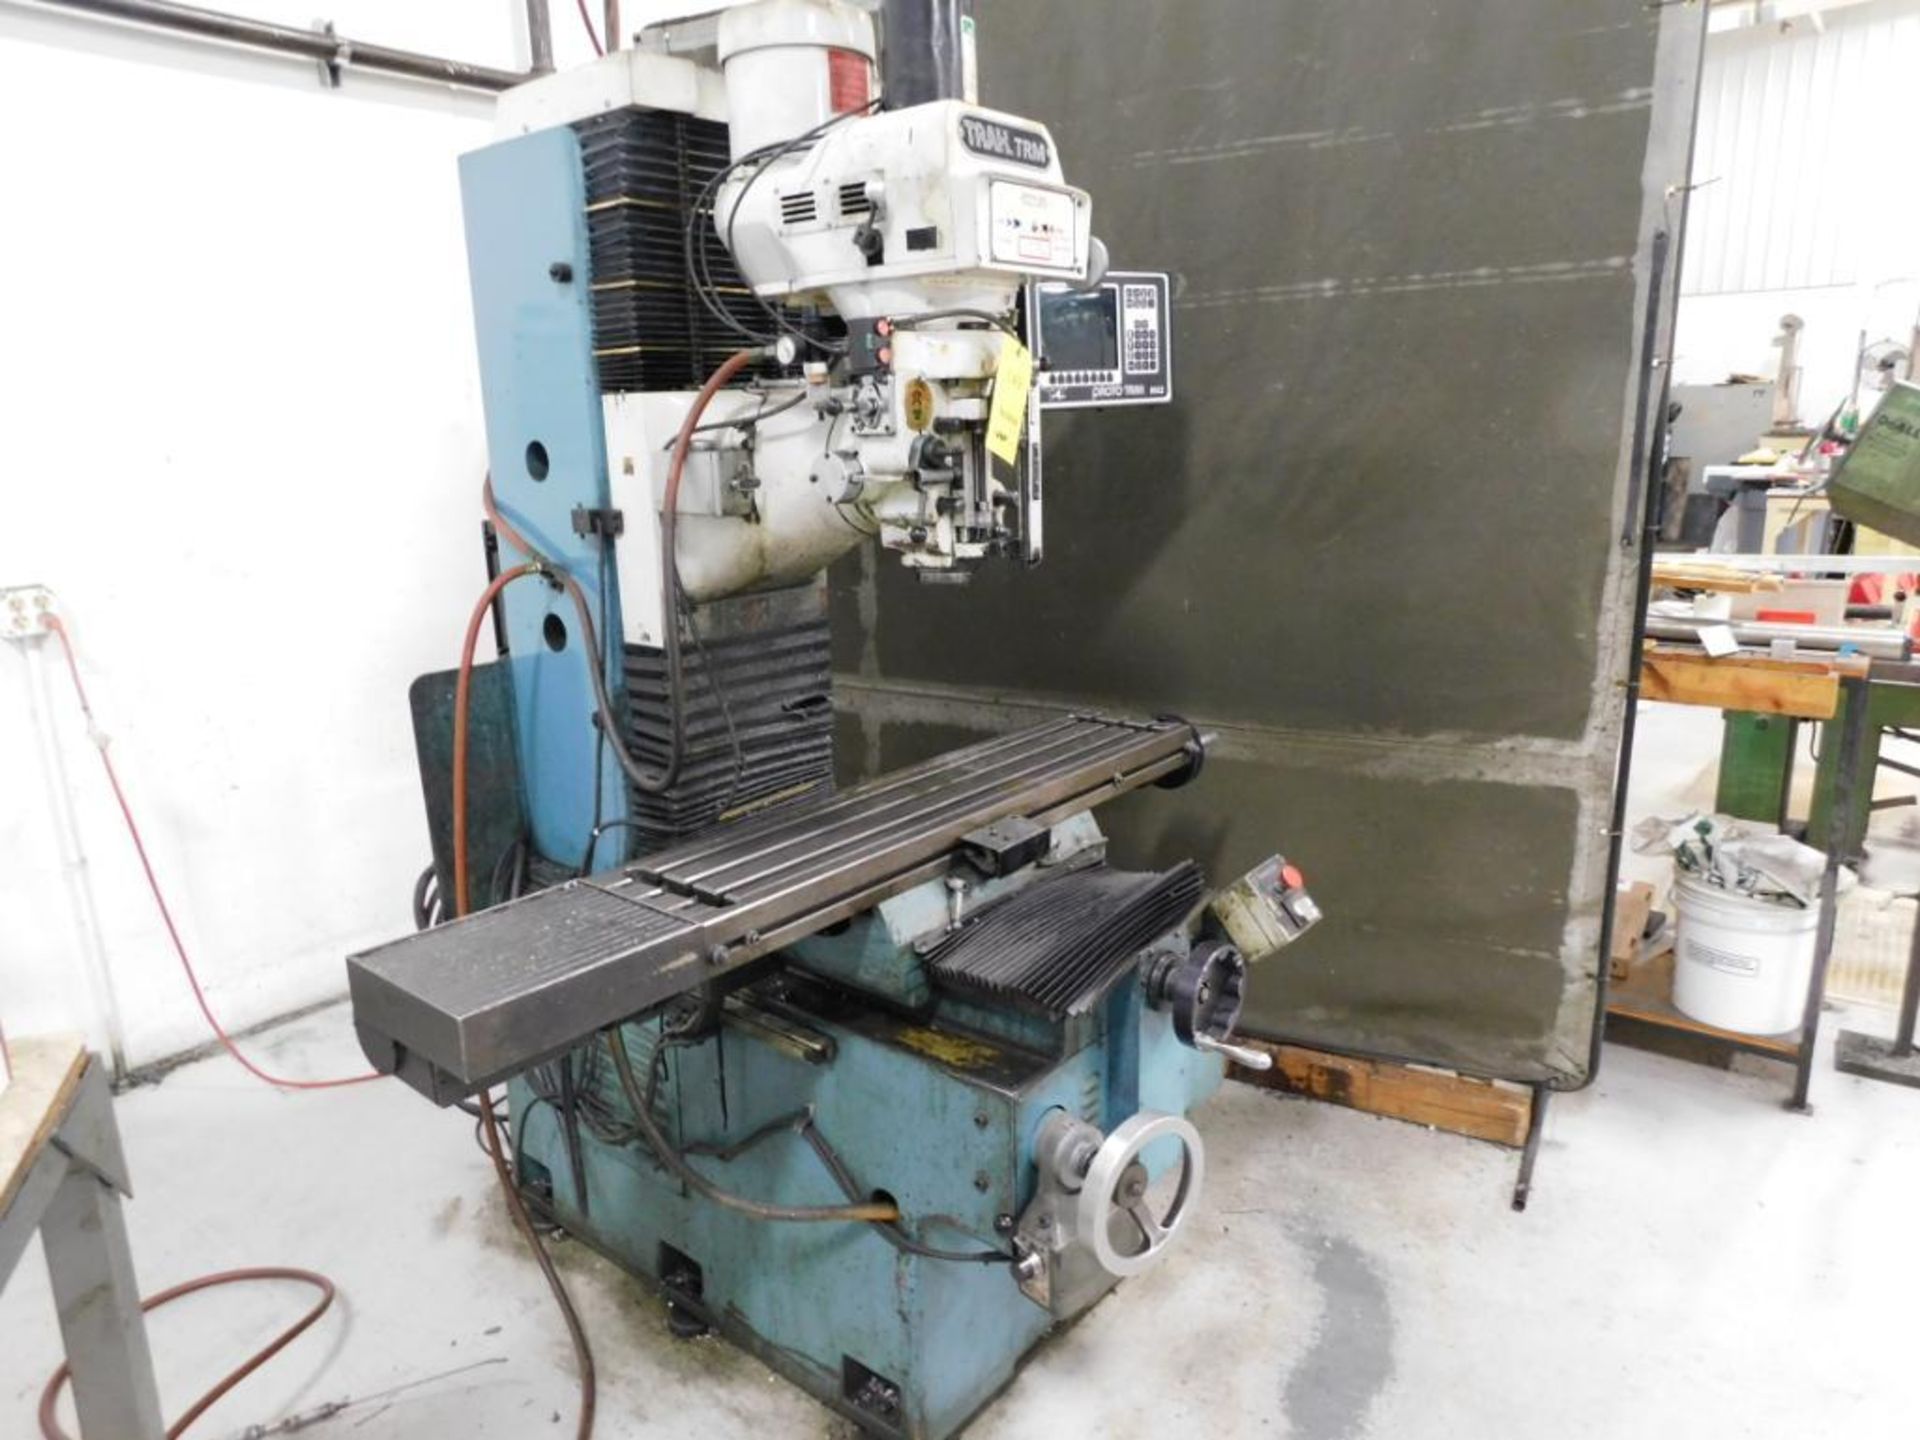 South Western Industries CNC Variable Speed Milling Machine, Model Trak-TRM, S/N 93-203 (1996), 10 i